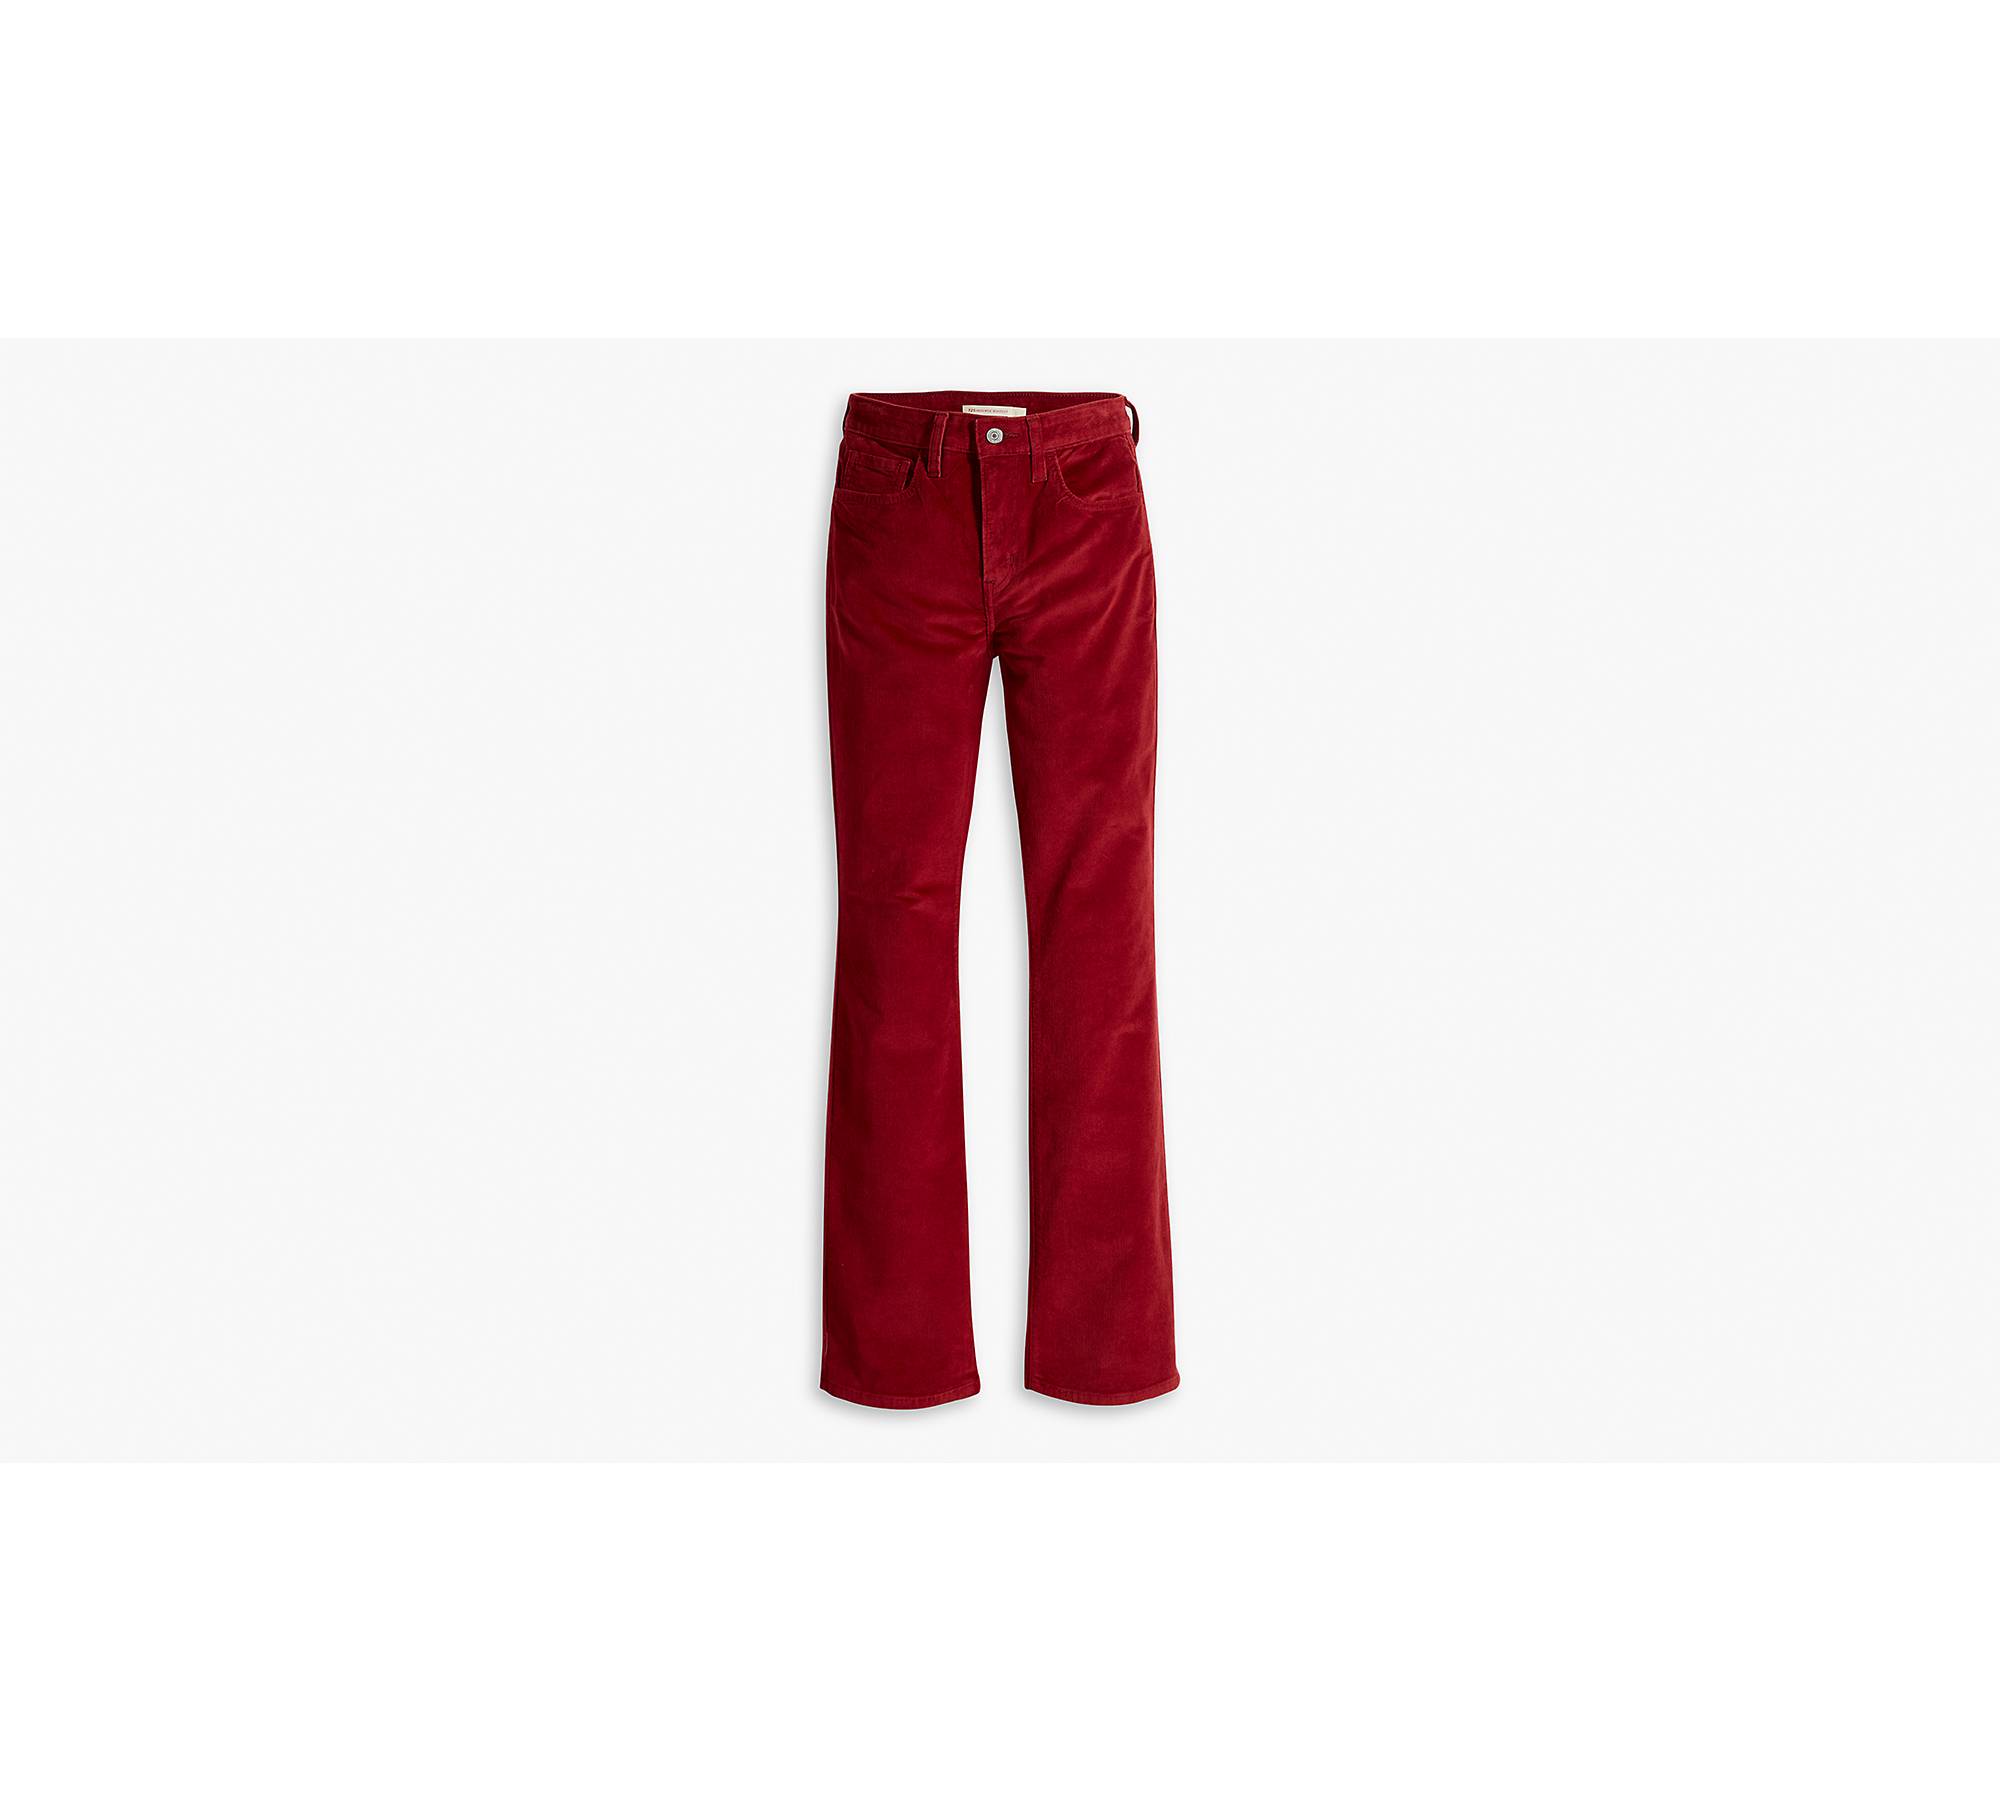 LOW RISE BOOTCUT PANTS LIMITED EDITION - Intense red